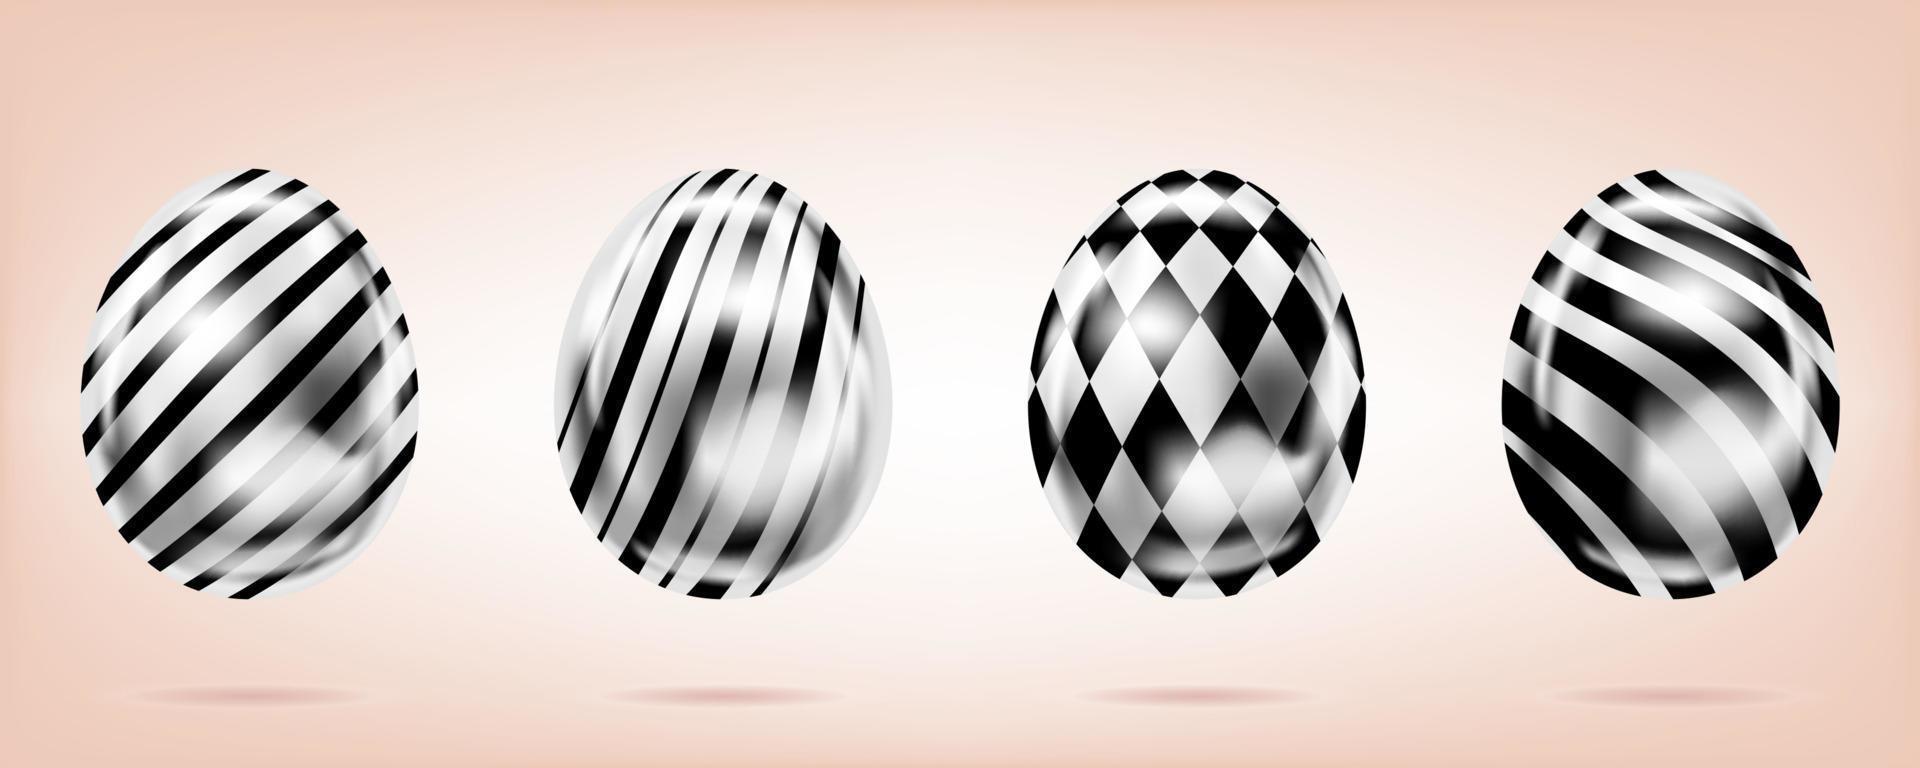 Four silver eggs on the pink background. Isolated objects for Easter. Stripes and diamonds ornate vector